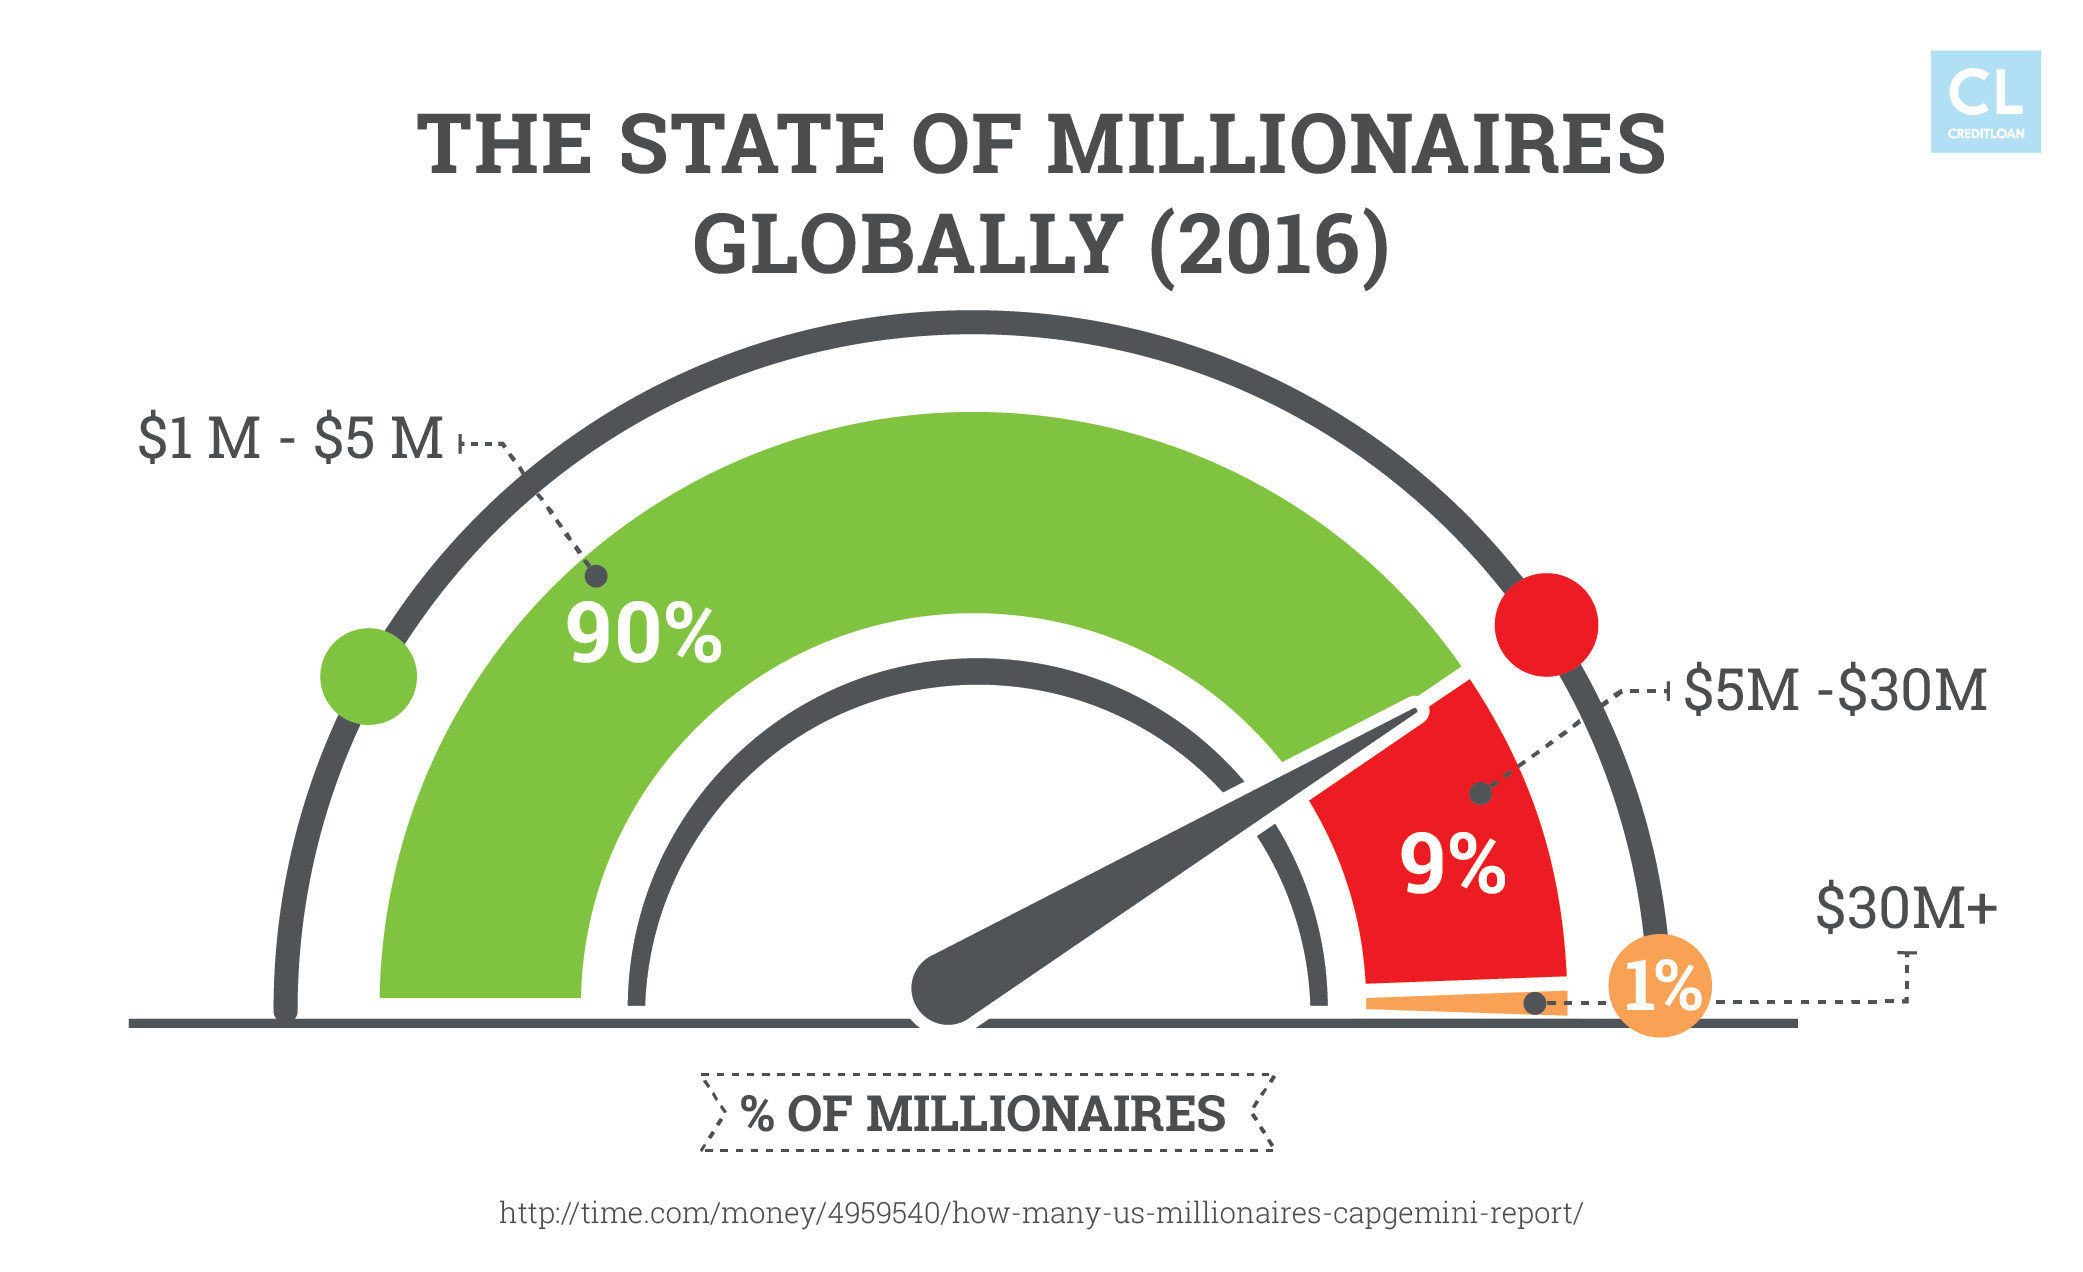 The State of Millionaires Globally (2016)